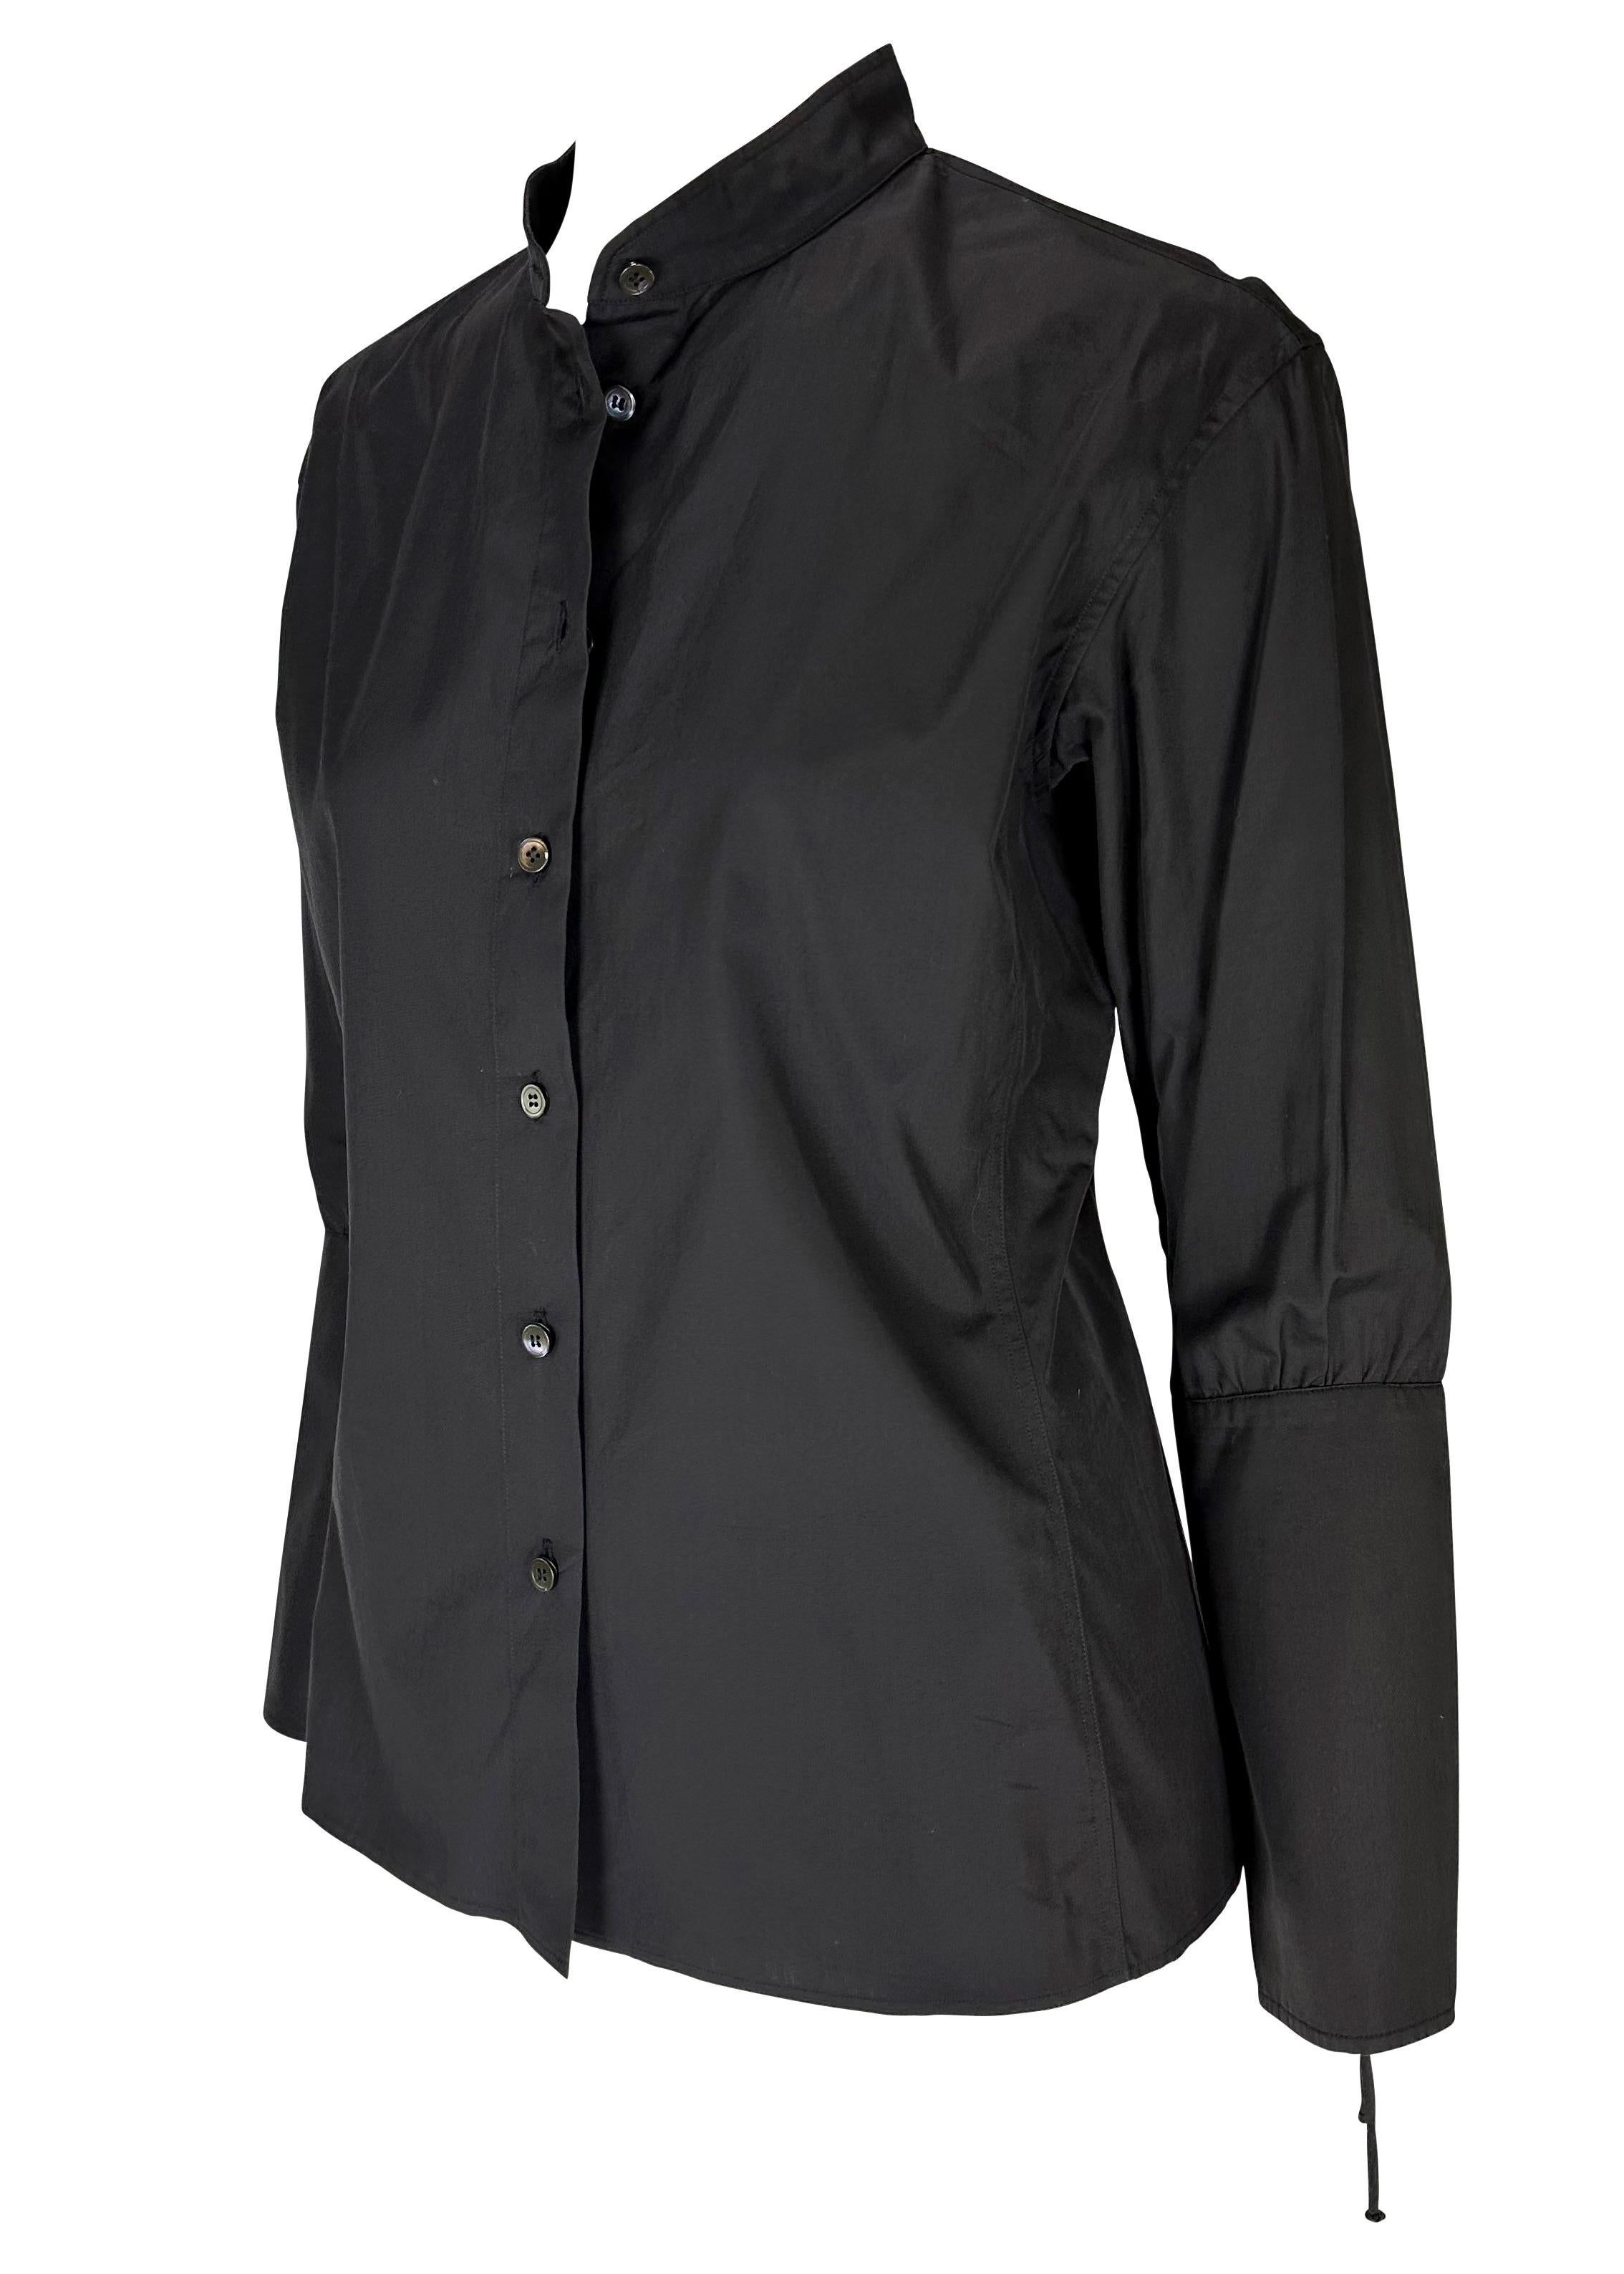 F/W 2001 Yves Saint Laurent by Tom Ford Lace-Up Cuff Black Button-Up Blouse For Sale 5